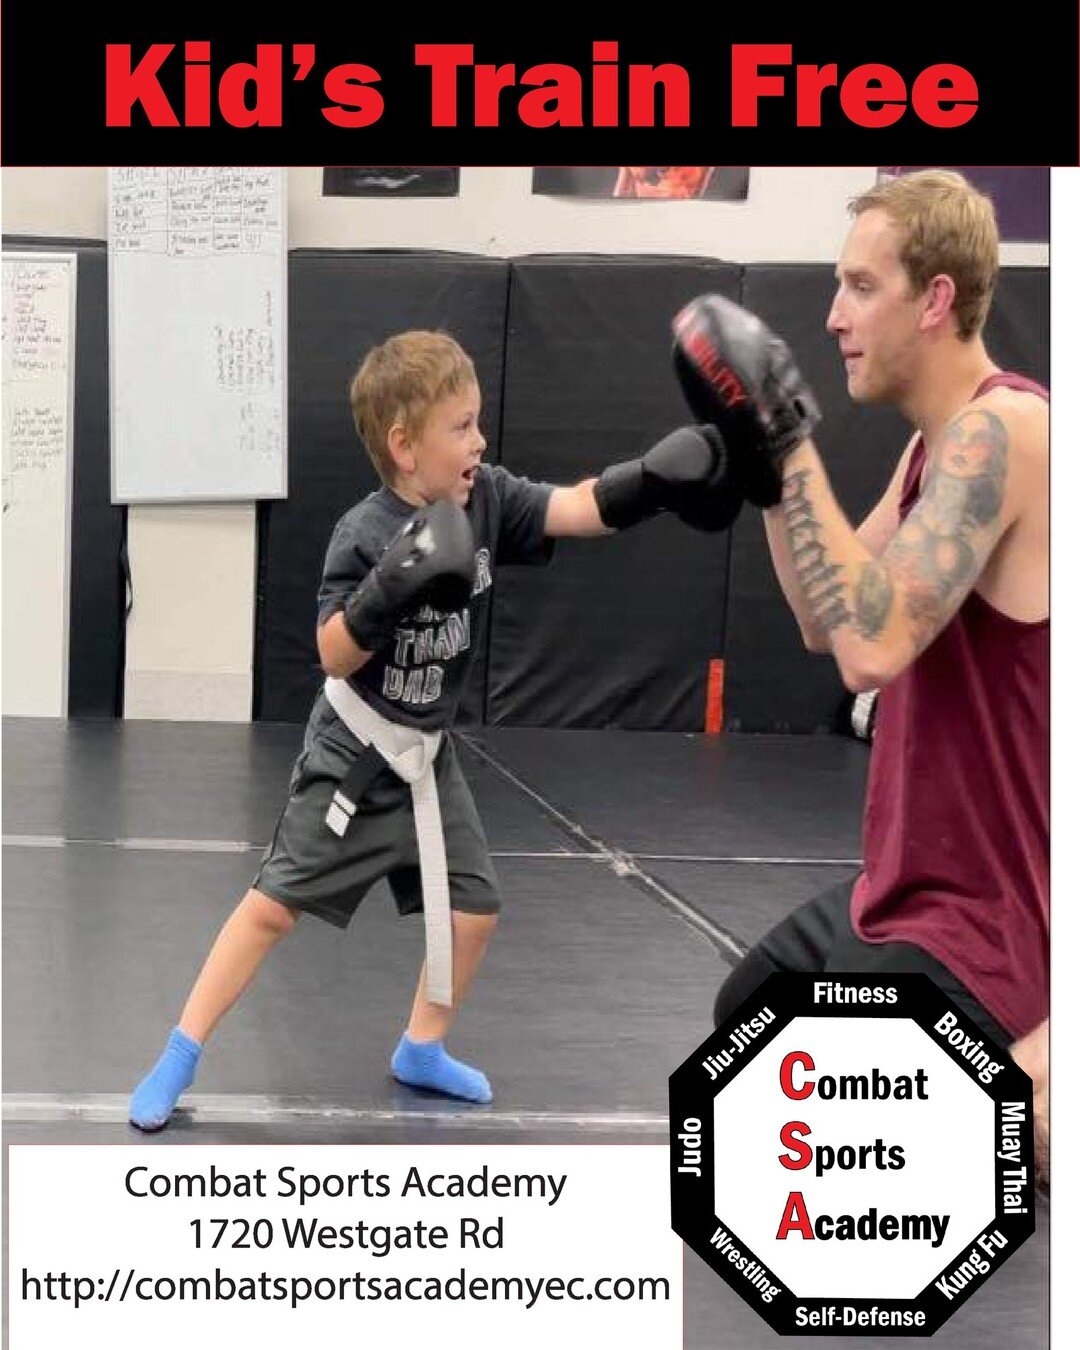 Don't let your kid sit on the couch for the holidays. We are offering Free Kids Classes for the rest of the month. Kids will learn Bullyproof strategies and Self-Defense and end with Nerf Wars and Dodgeball. Only you get to gain 10 pounds during the 